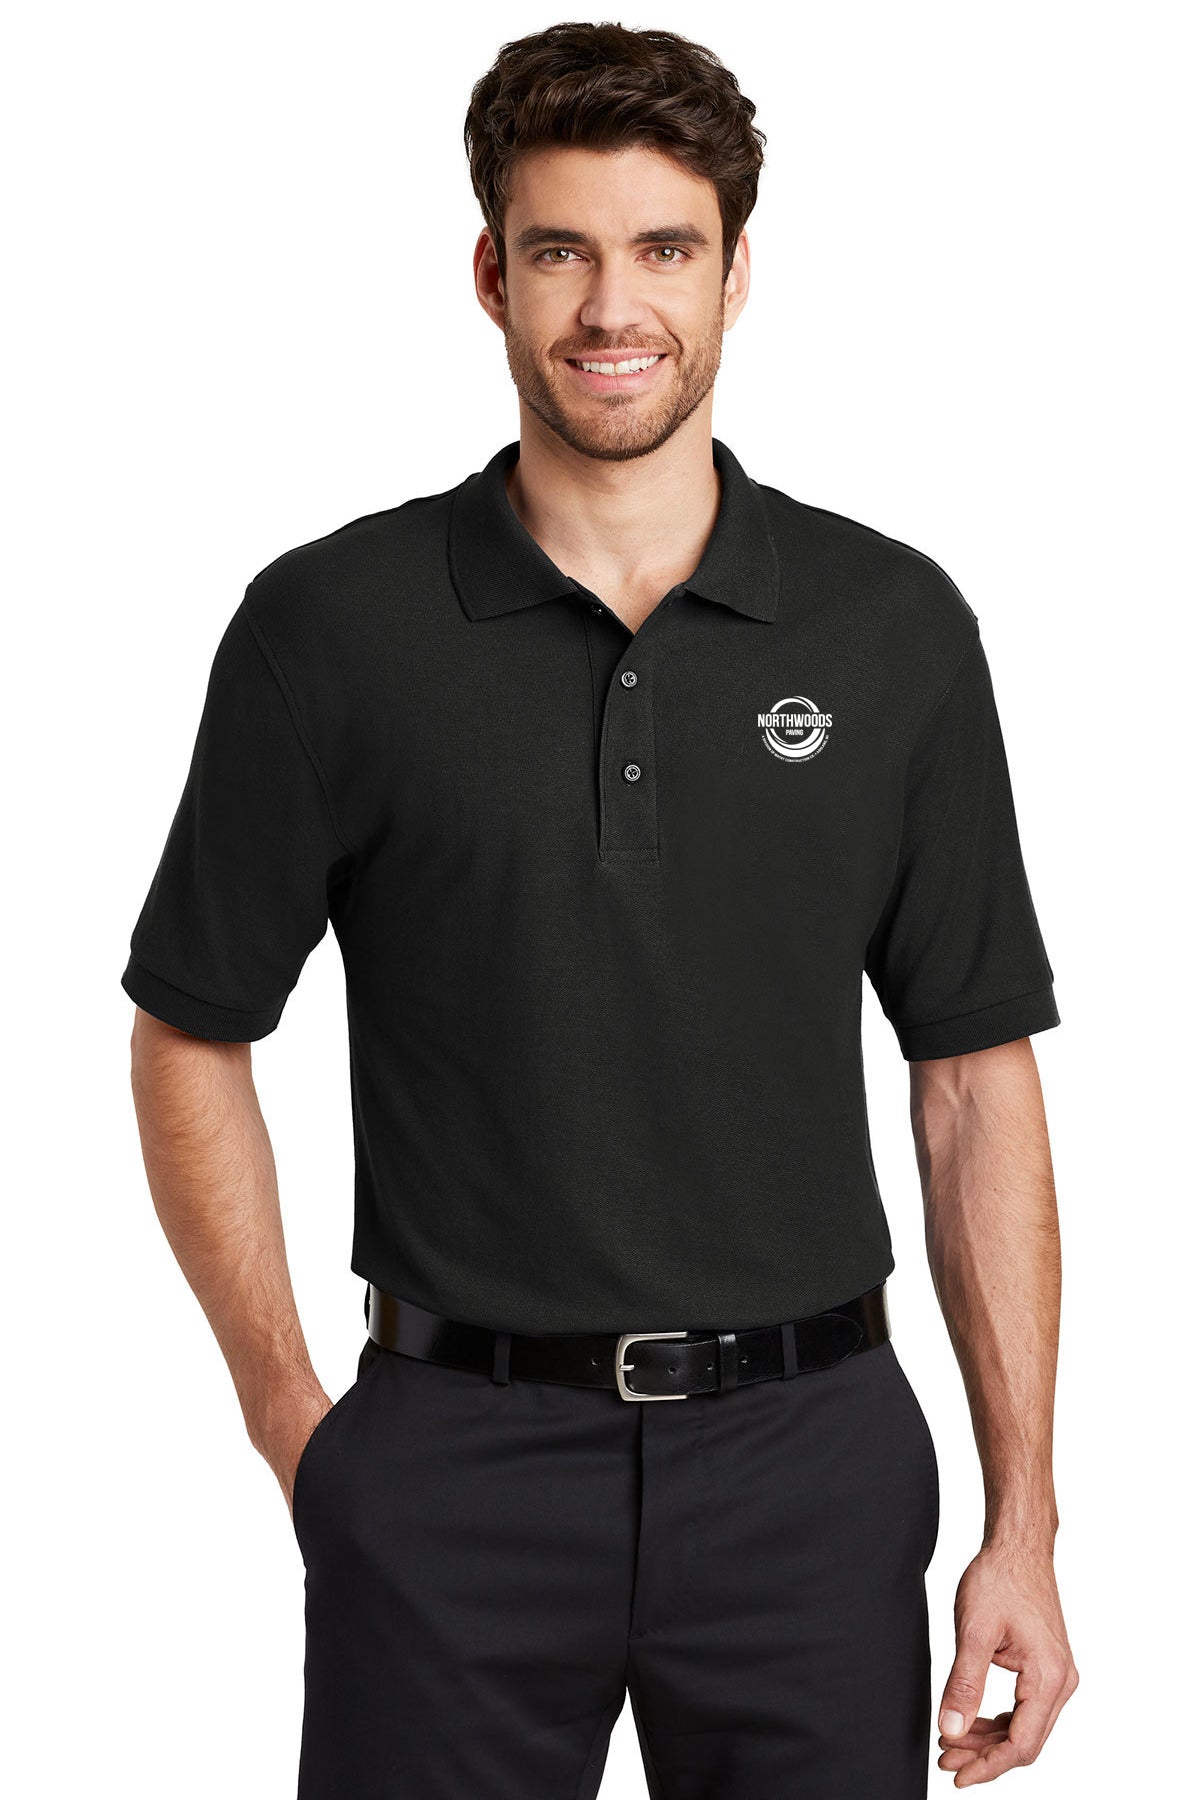 Northwoods Paving Tall Silk Touch Polo